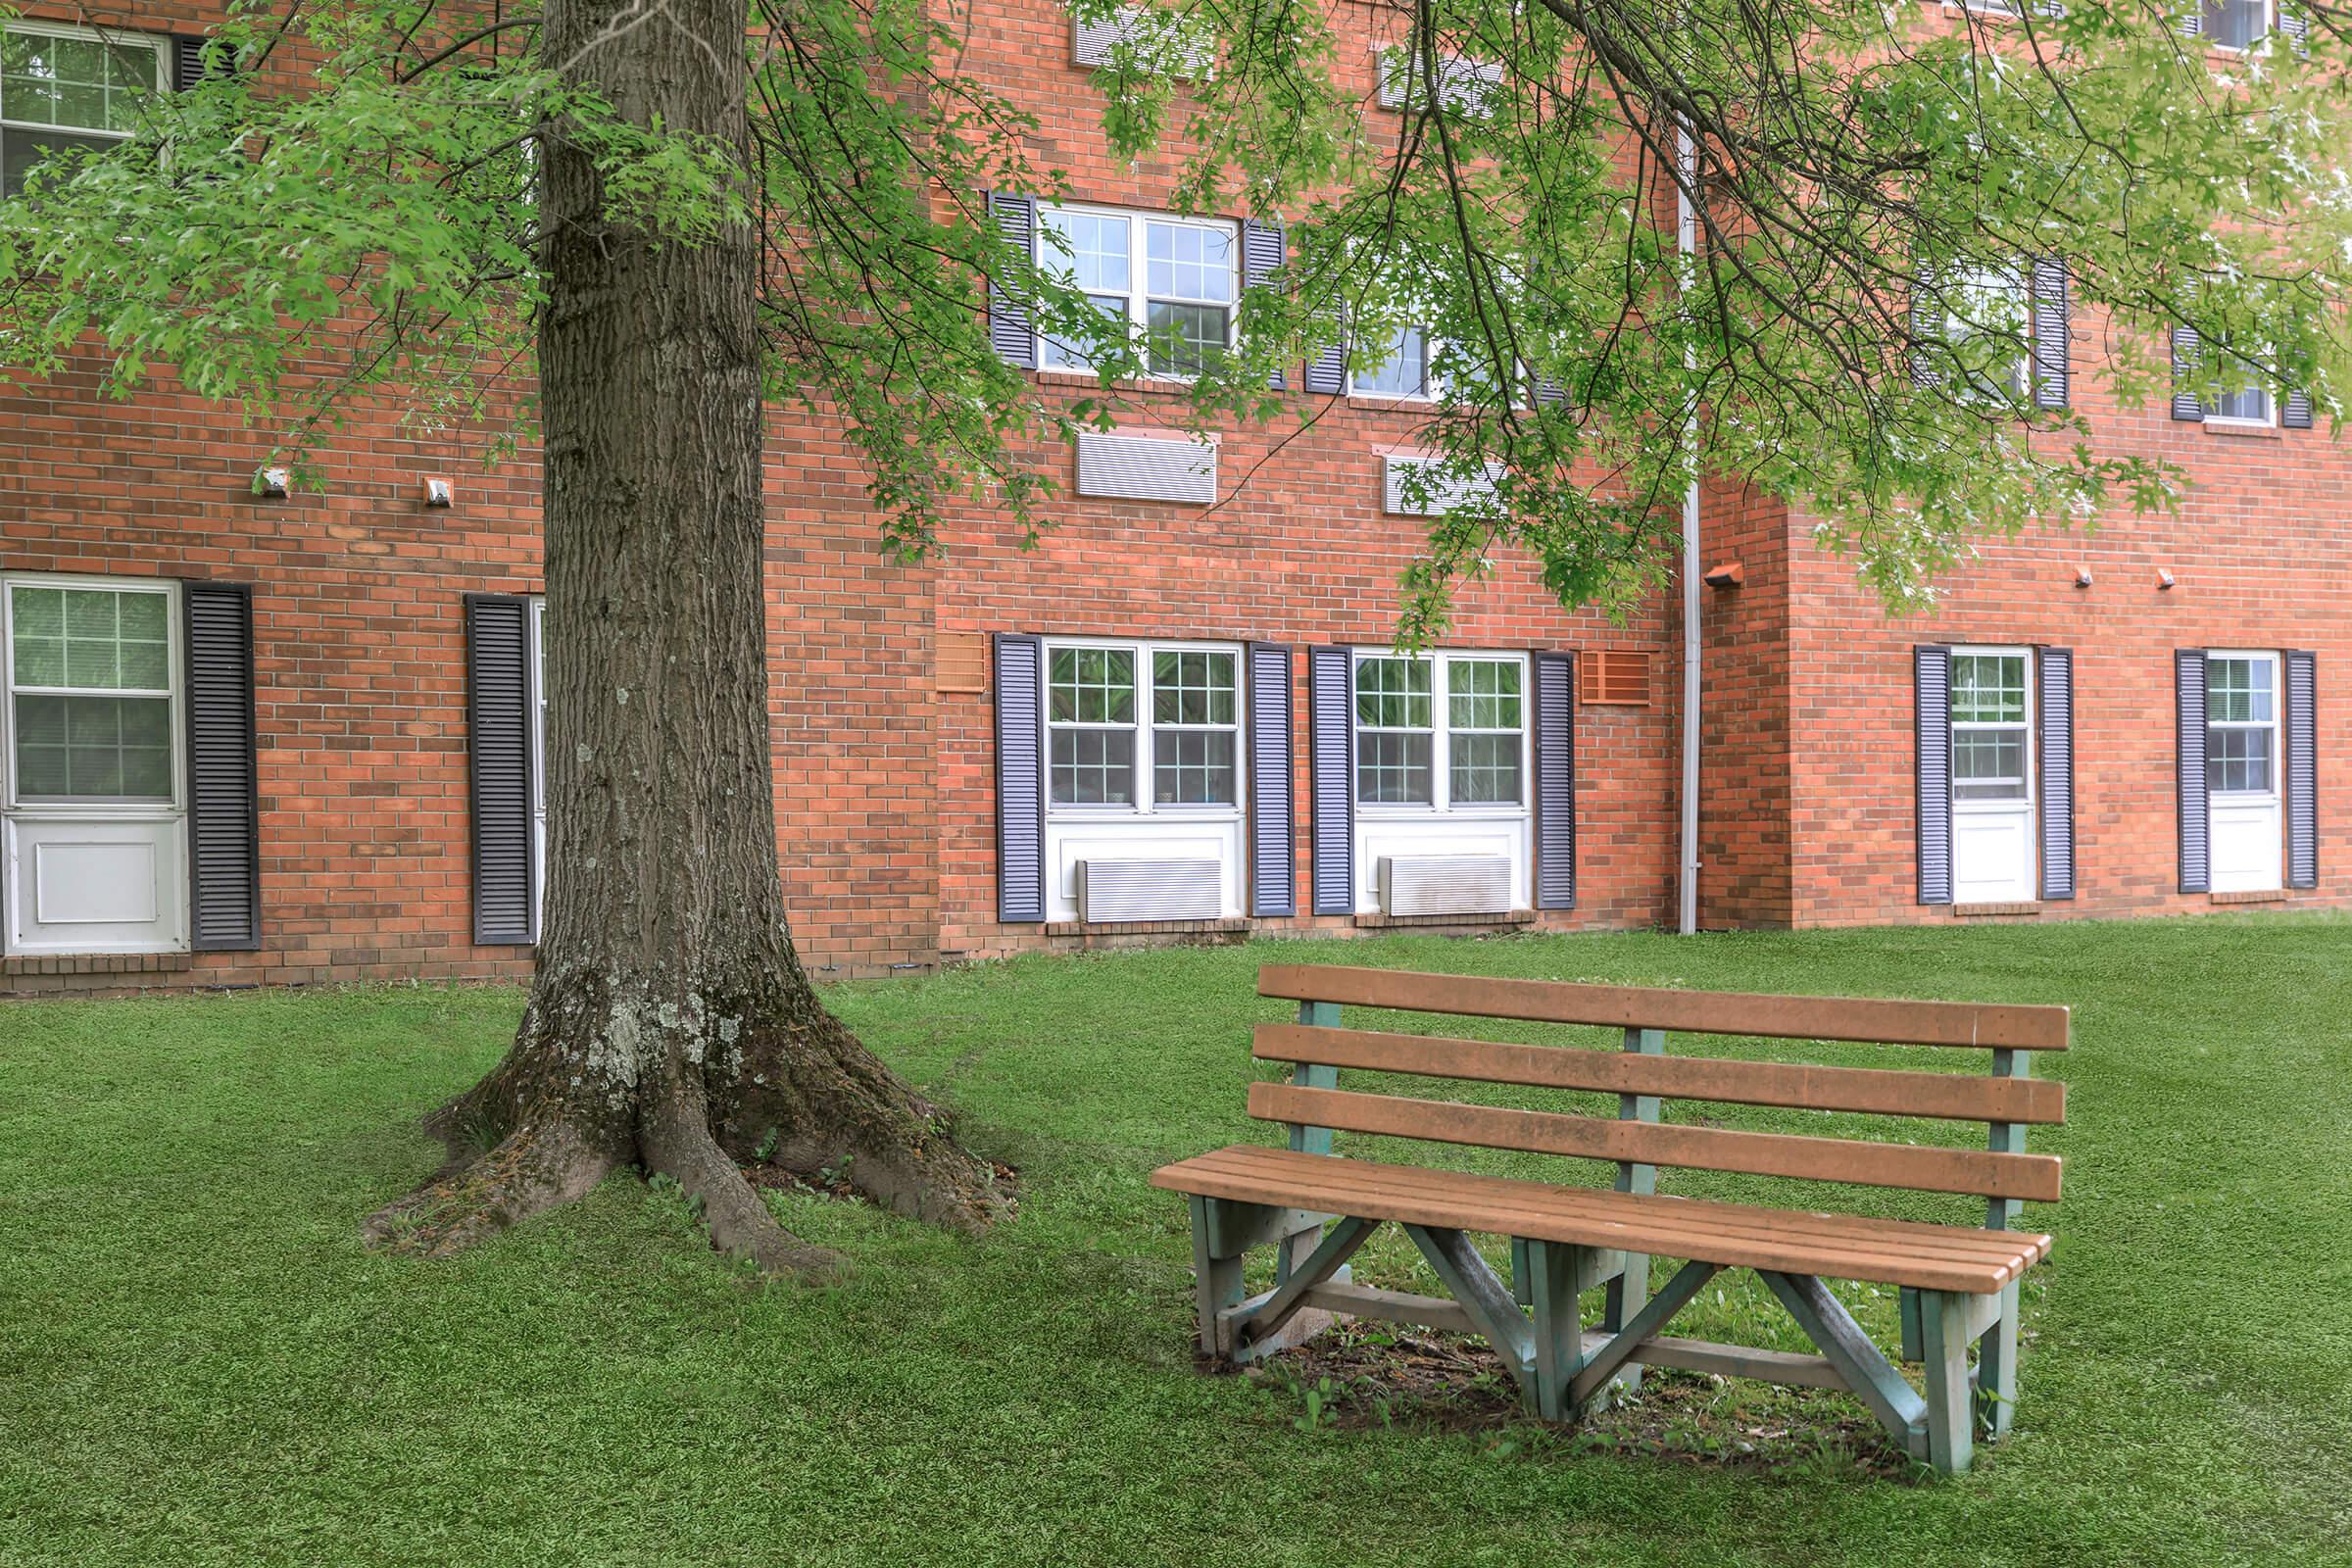 an empty park bench sitting in front of a brick building